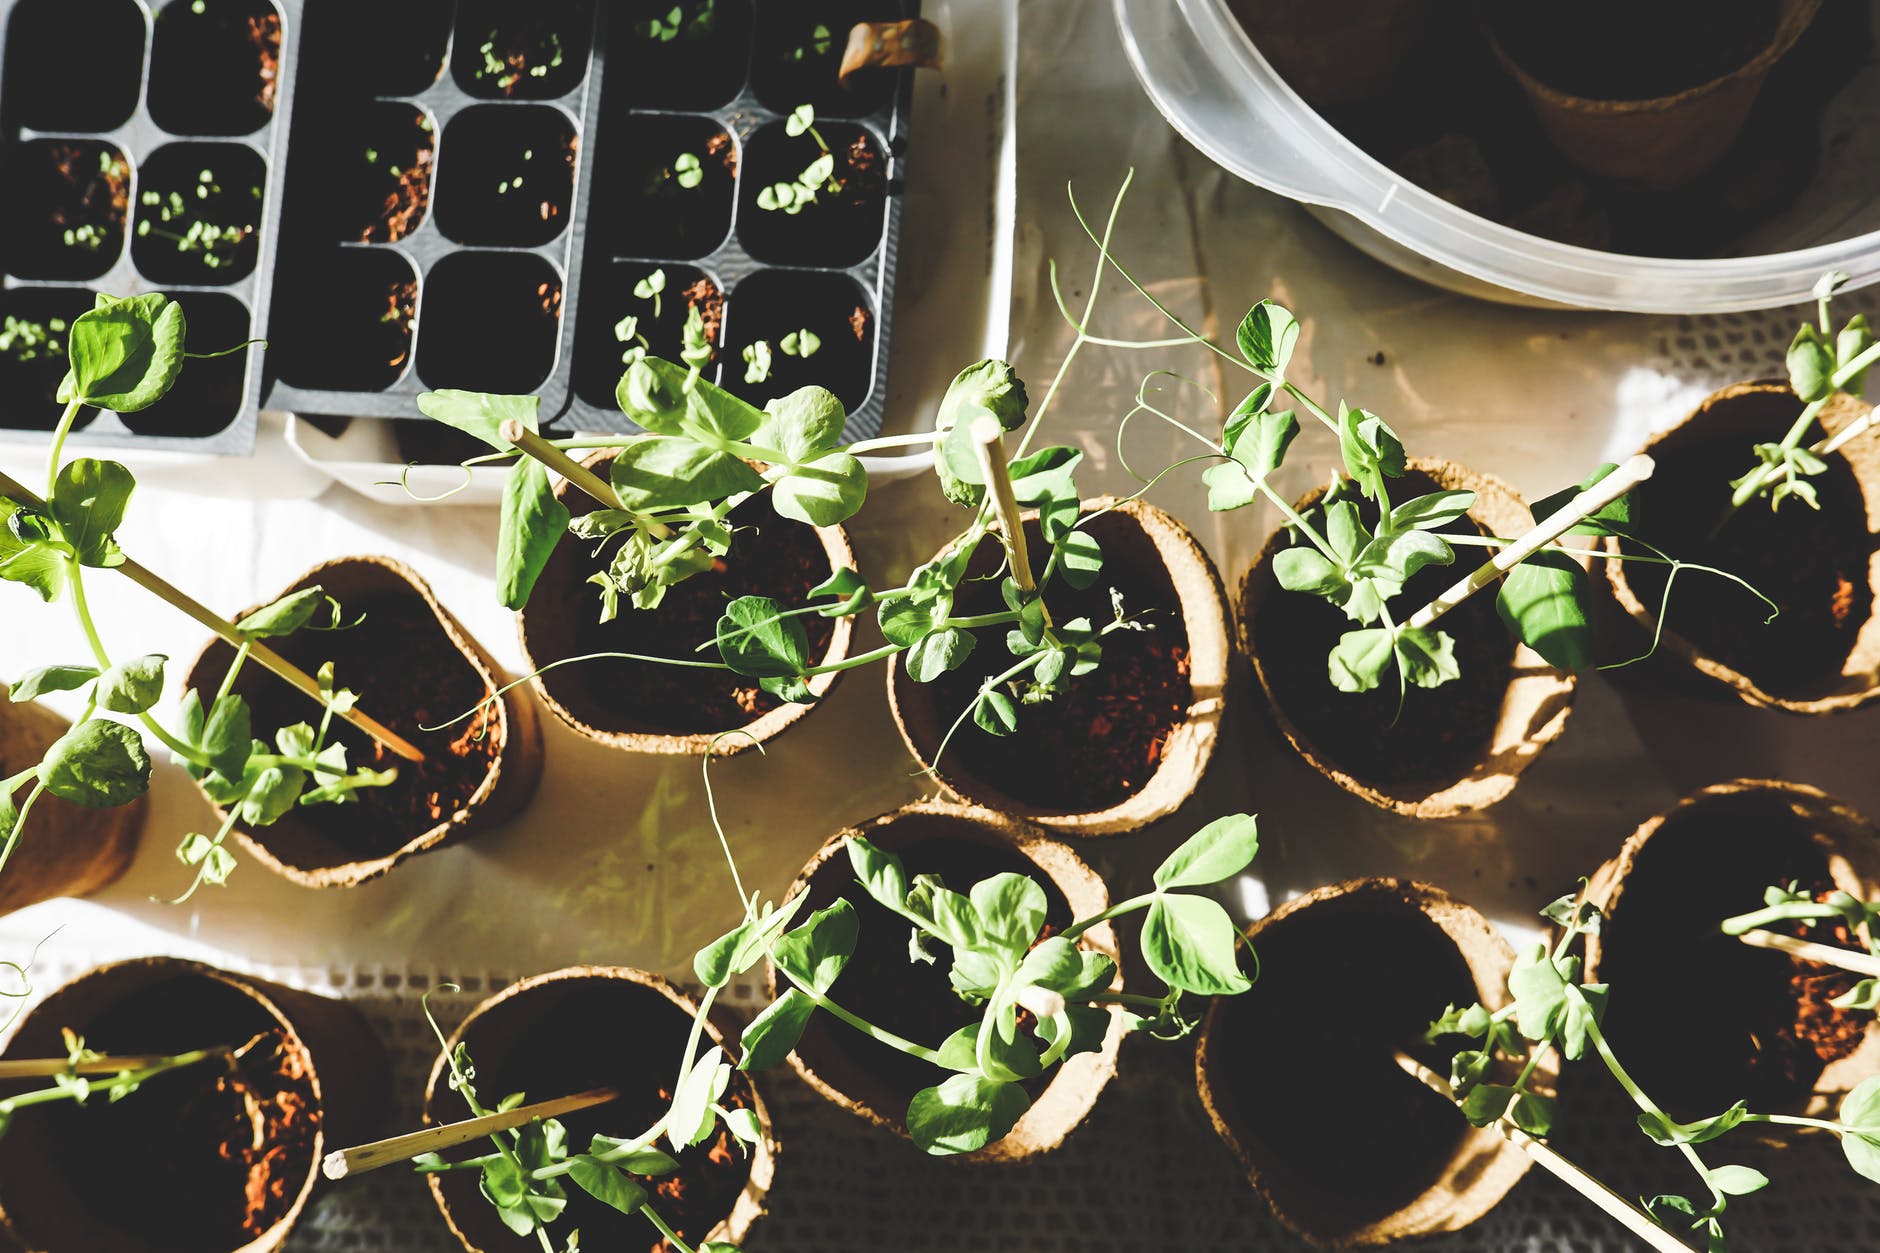 Here's just a few things to keep in mind when starting off your plants indoors.